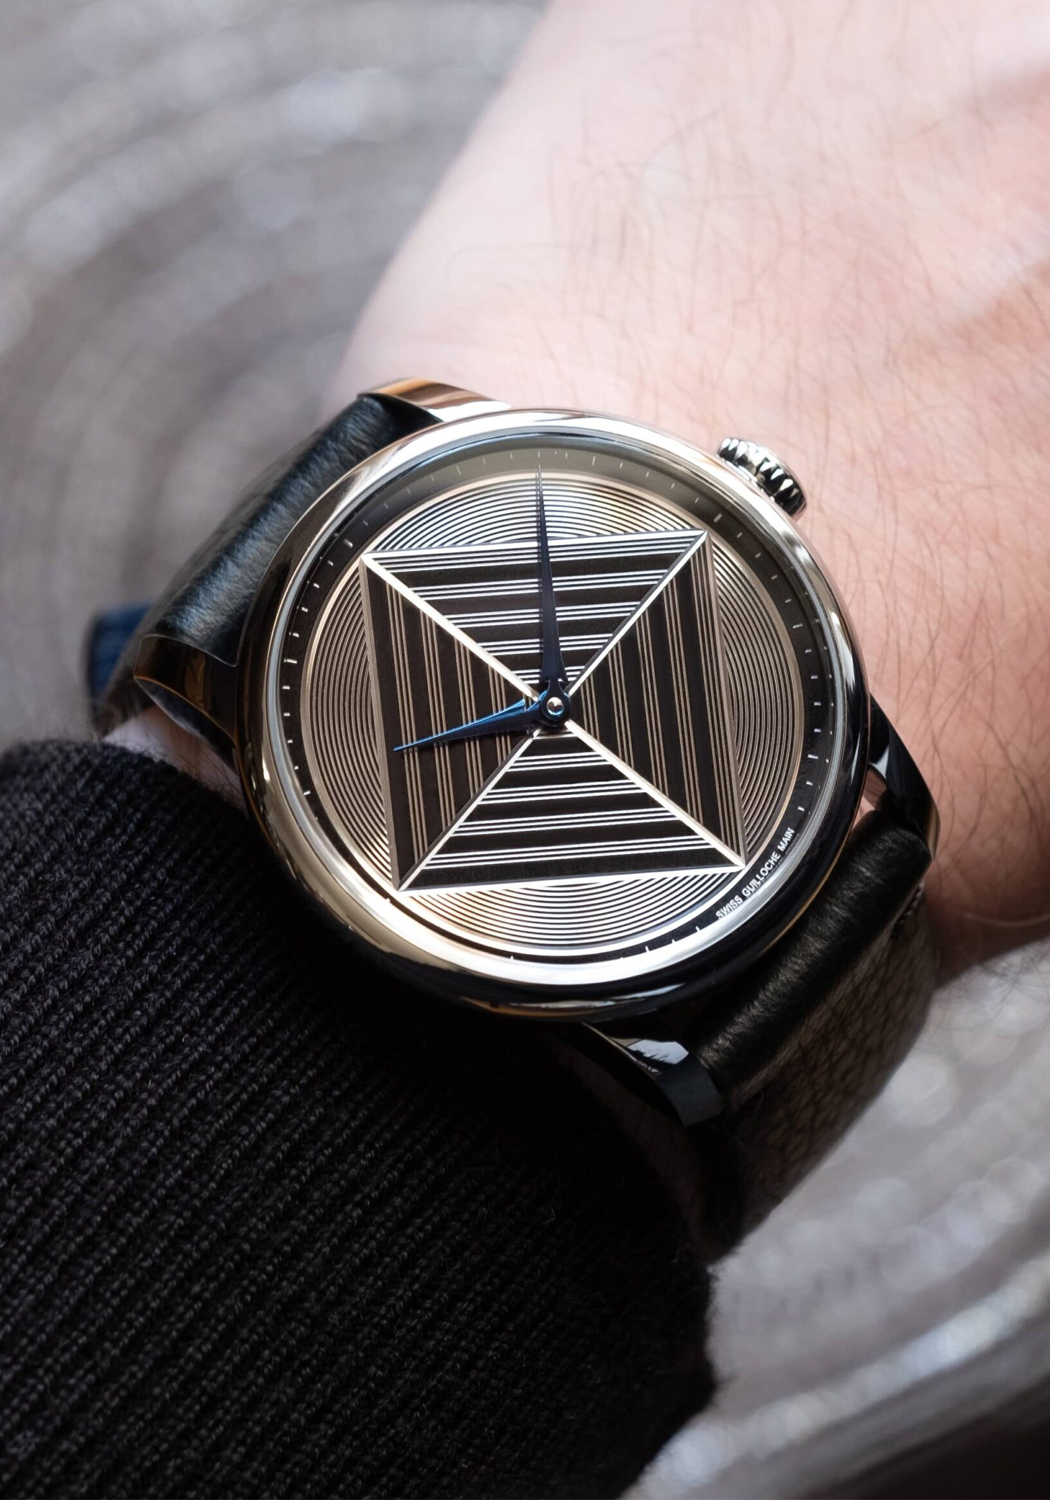 Louis Erard Excellence Guilloche Main II - Hands-On, Price